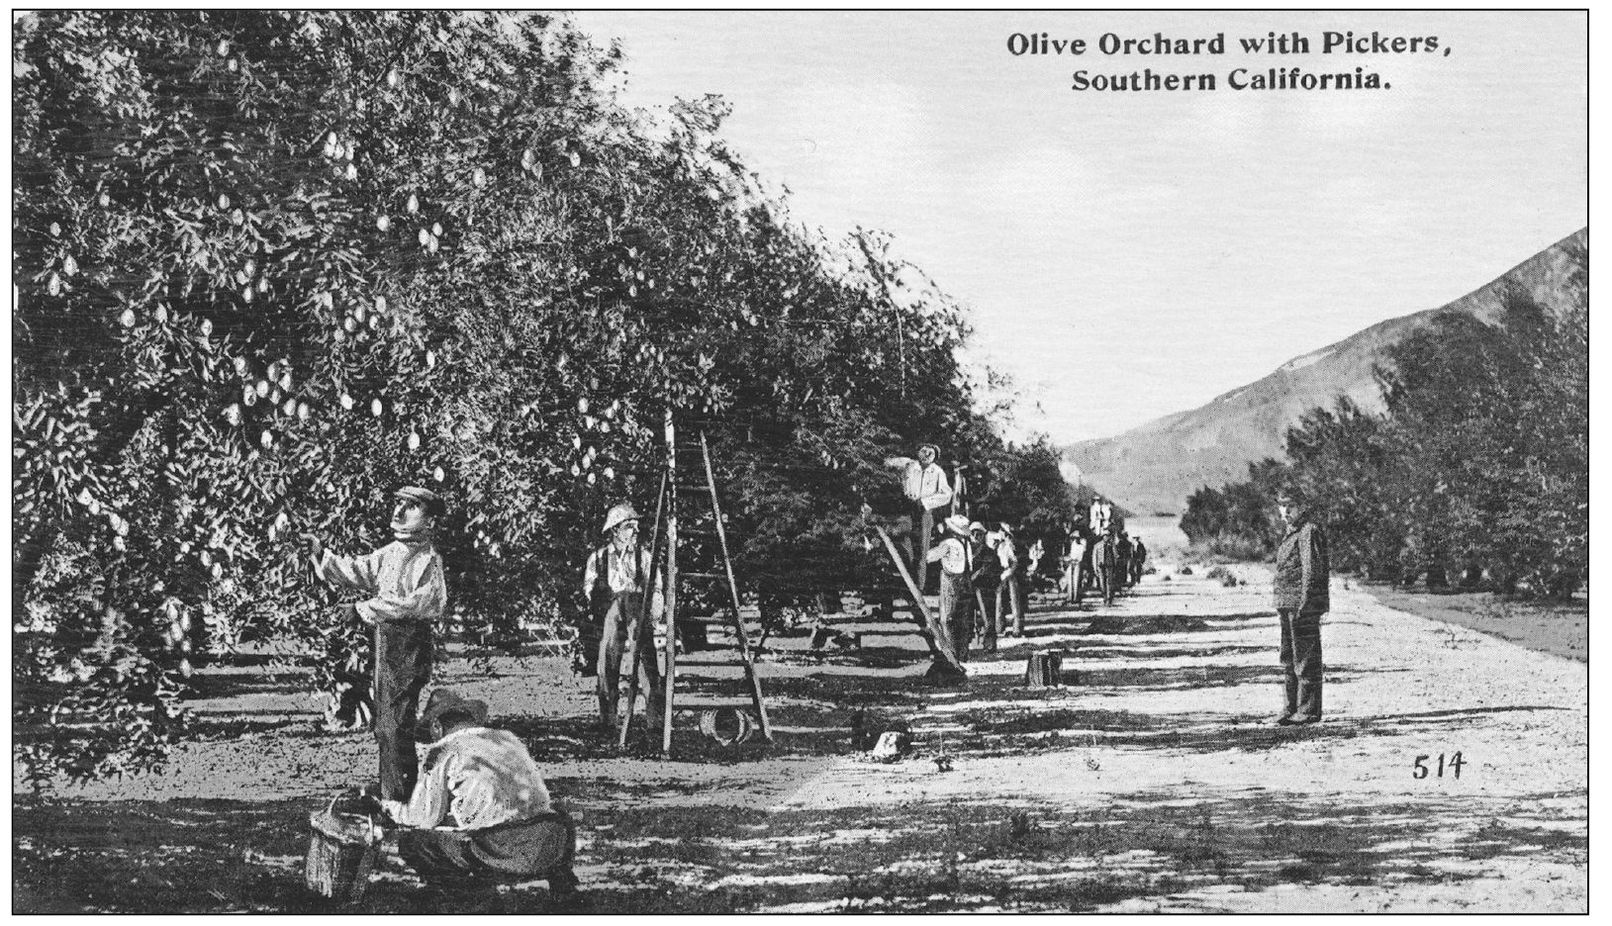 This 1913 postcard depicts pickers harvesting an olive orchard Olive - photo 14